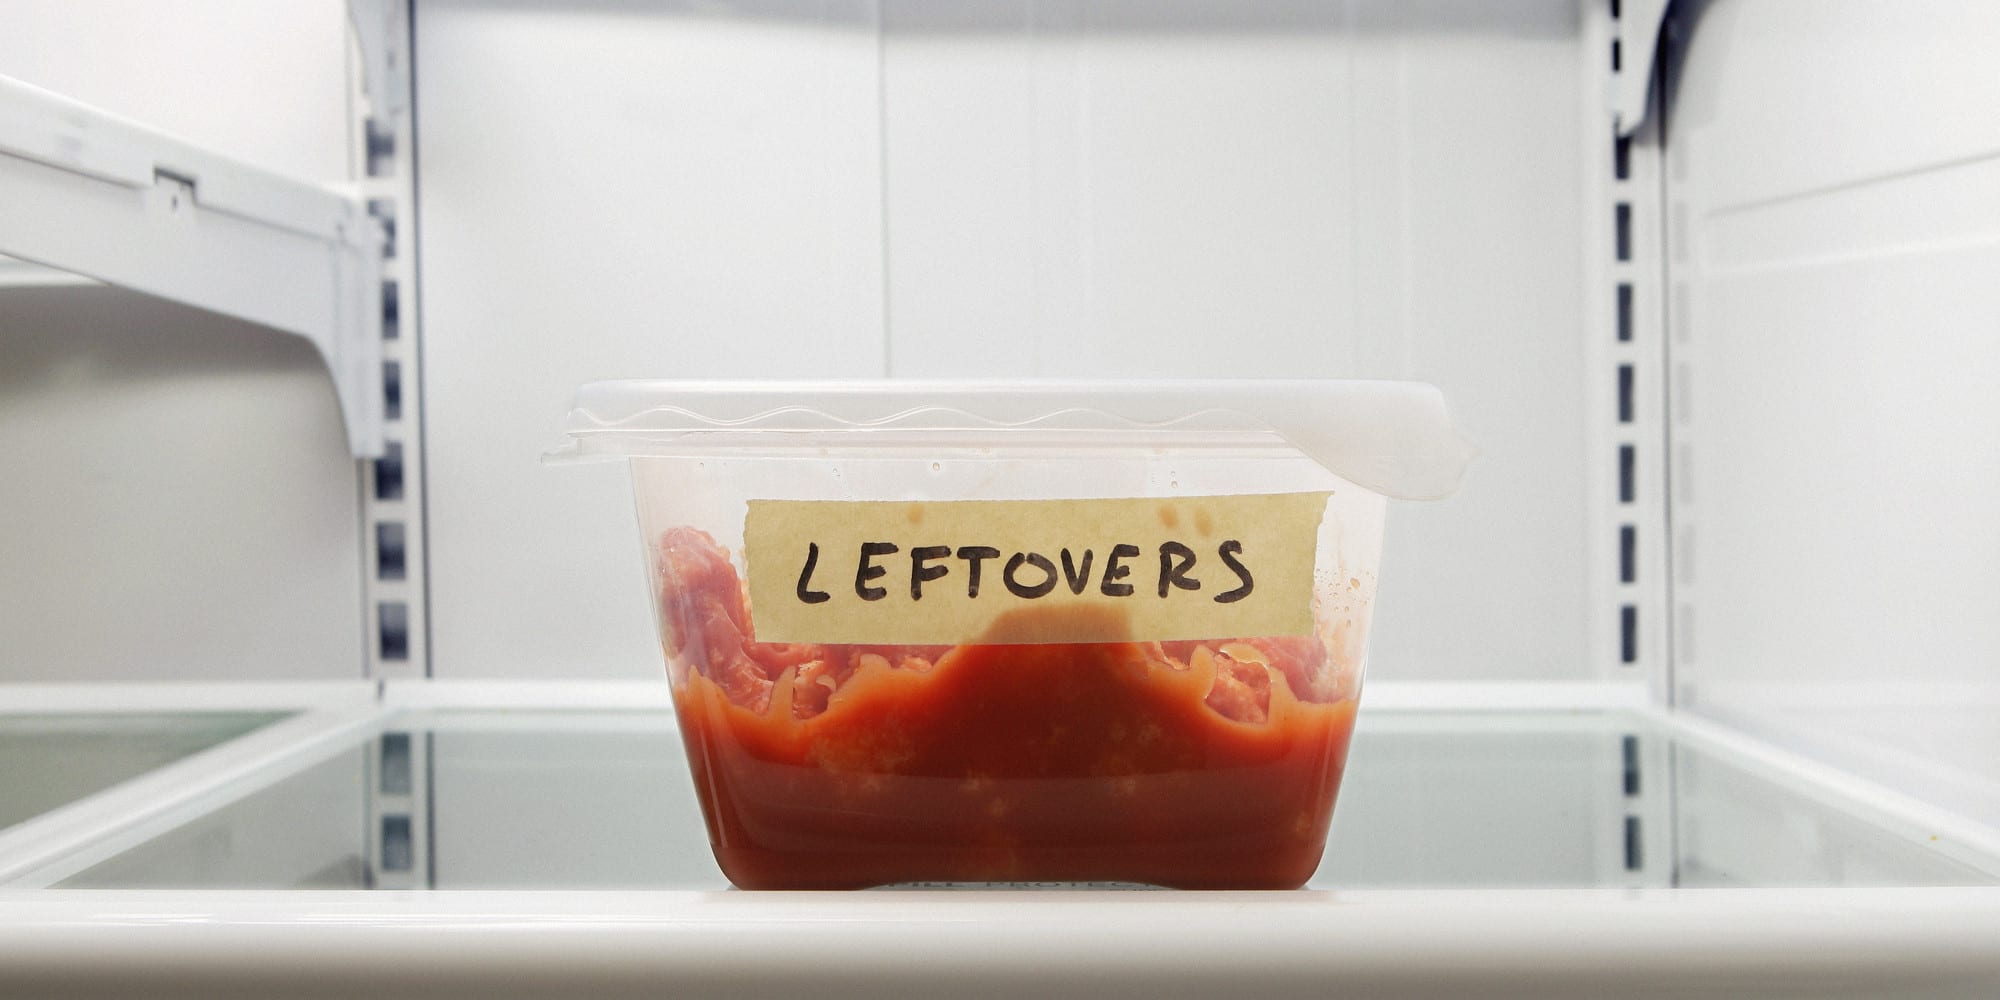 Is Painting Like Leftovers in the Fridge?